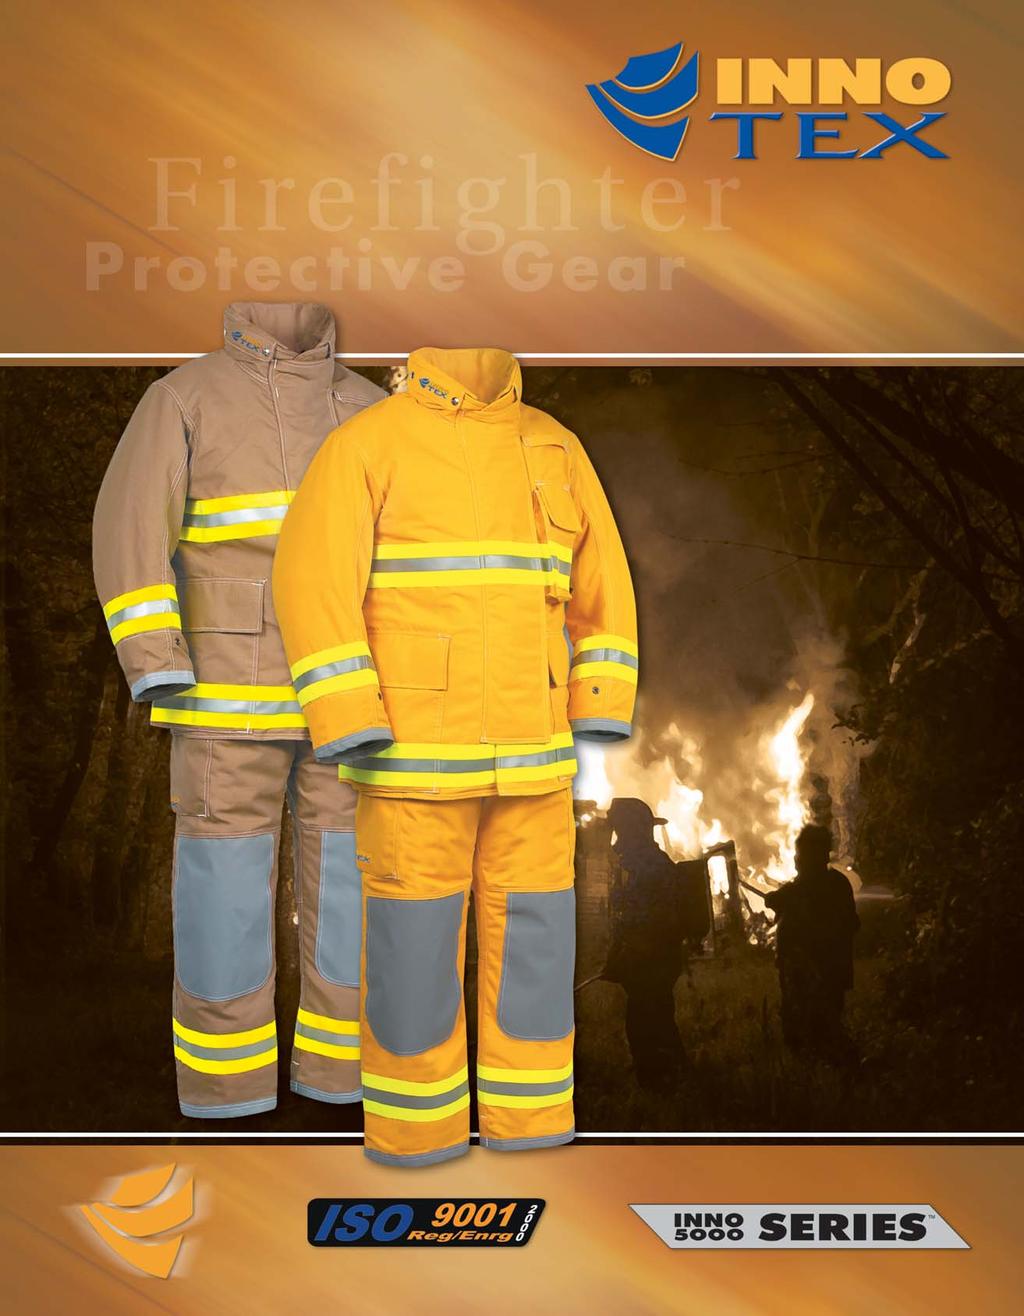 firefighter Protective Gear